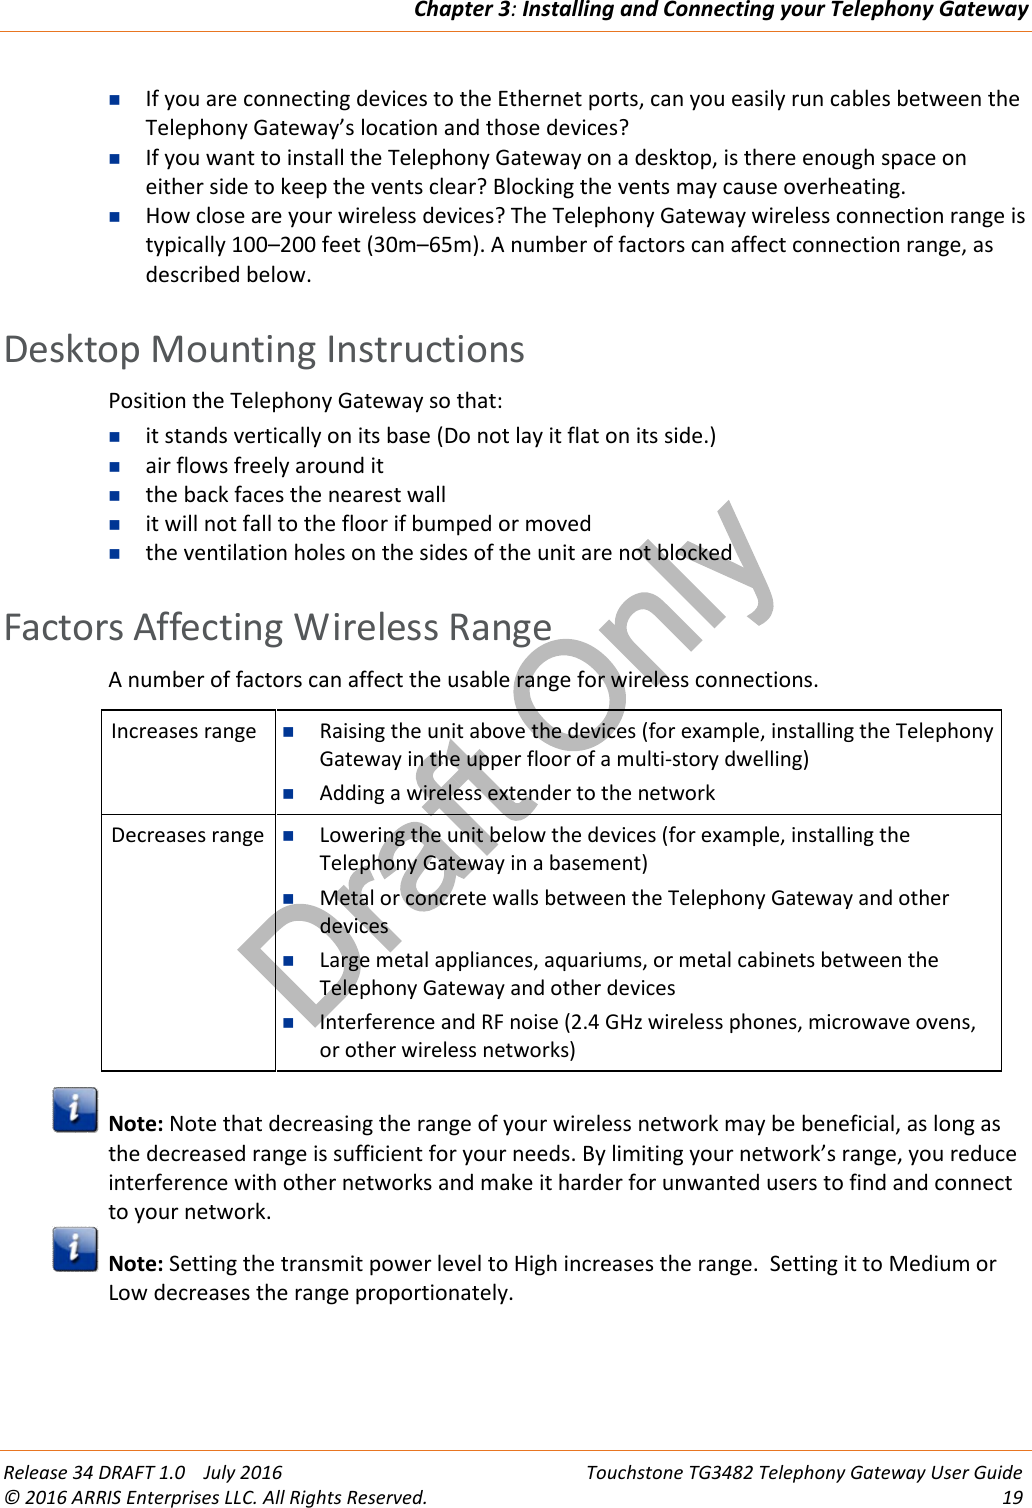 Draft OnlyChapter 3:Installing and Connecting your Telephony GatewayRelease 34 DRAFT 1.0 July 2016 Touchstone TG3482 Telephony Gateway User Guide© 2016 ARRIS Enterprises LLC. All Rights Reserved. 19If you are connecting devices to the Ethernet ports, can you easily run cables between theTelephony Gateway’s location and those devices?If you want to install the Telephony Gateway on a desktop, is there enough space oneither side to keep the vents clear? Blocking the vents may cause overheating.How close are your wireless devices? The Telephony Gateway wireless connection range istypically 100–200 feet (30m–65m). A number of factors can affect connection range, asdescribed below.Desktop Mounting InstructionsPosition the Telephony Gateway so that:it stands vertically on its base (Do not lay it flat on its side.)air flows freely around itthe back faces the nearest wallit will not fall to the floor if bumped or movedthe ventilation holes on the sides of the unit are not blockedFactors Affecting Wireless RangeA number of factors can affect the usable range for wireless connections.Increases range Raising the unit above the devices (for example, installing the TelephonyGateway in the upper floor of a multi-story dwelling)Adding a wireless extender to the networkDecreases range Lowering the unit below the devices (for example, installing theTelephony Gateway in a basement)Metal or concrete walls between the Telephony Gateway and otherdevicesLarge metal appliances, aquariums, or metal cabinets between theTelephony Gateway and other devicesInterference and RF noise (2.4 GHz wireless phones, microwave ovens,or other wireless networks)Note: Note that decreasing the range of your wireless network may be beneficial, as long asthe decreased range is sufficient for your needs. By limiting your network’s range, you reduceinterference with other networks and make it harder for unwanted users to find and connectto your network.Note: Setting the transmit power level to High increases the range. Setting it to Medium orLow decreases the range proportionately.